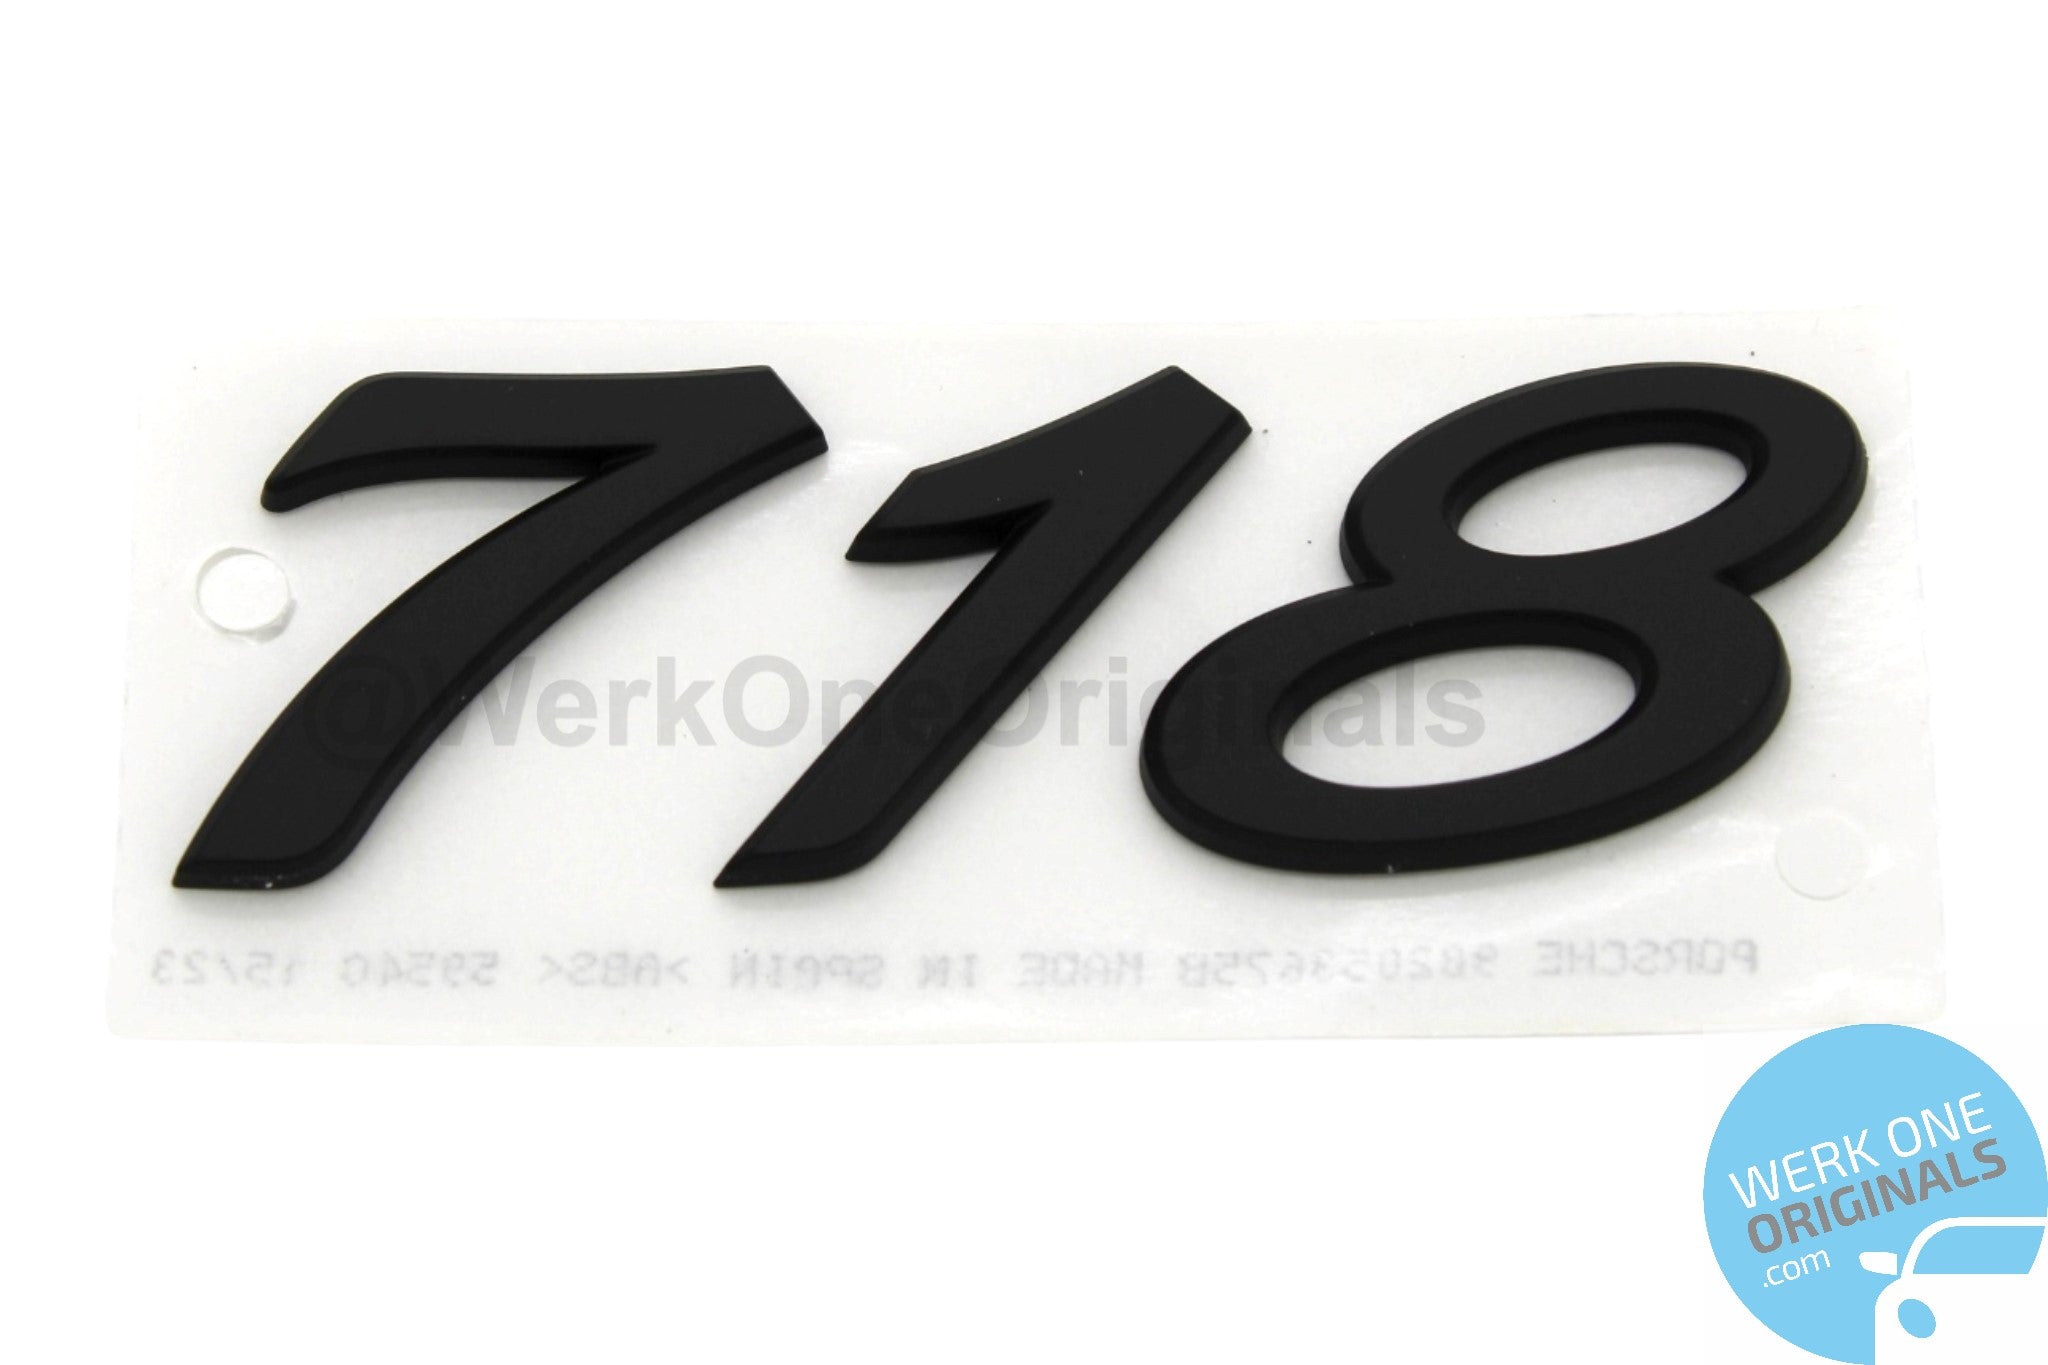 Porsche Official '718' Rear Badge in Matte Black for Boxster & Cayman Type 718 Models